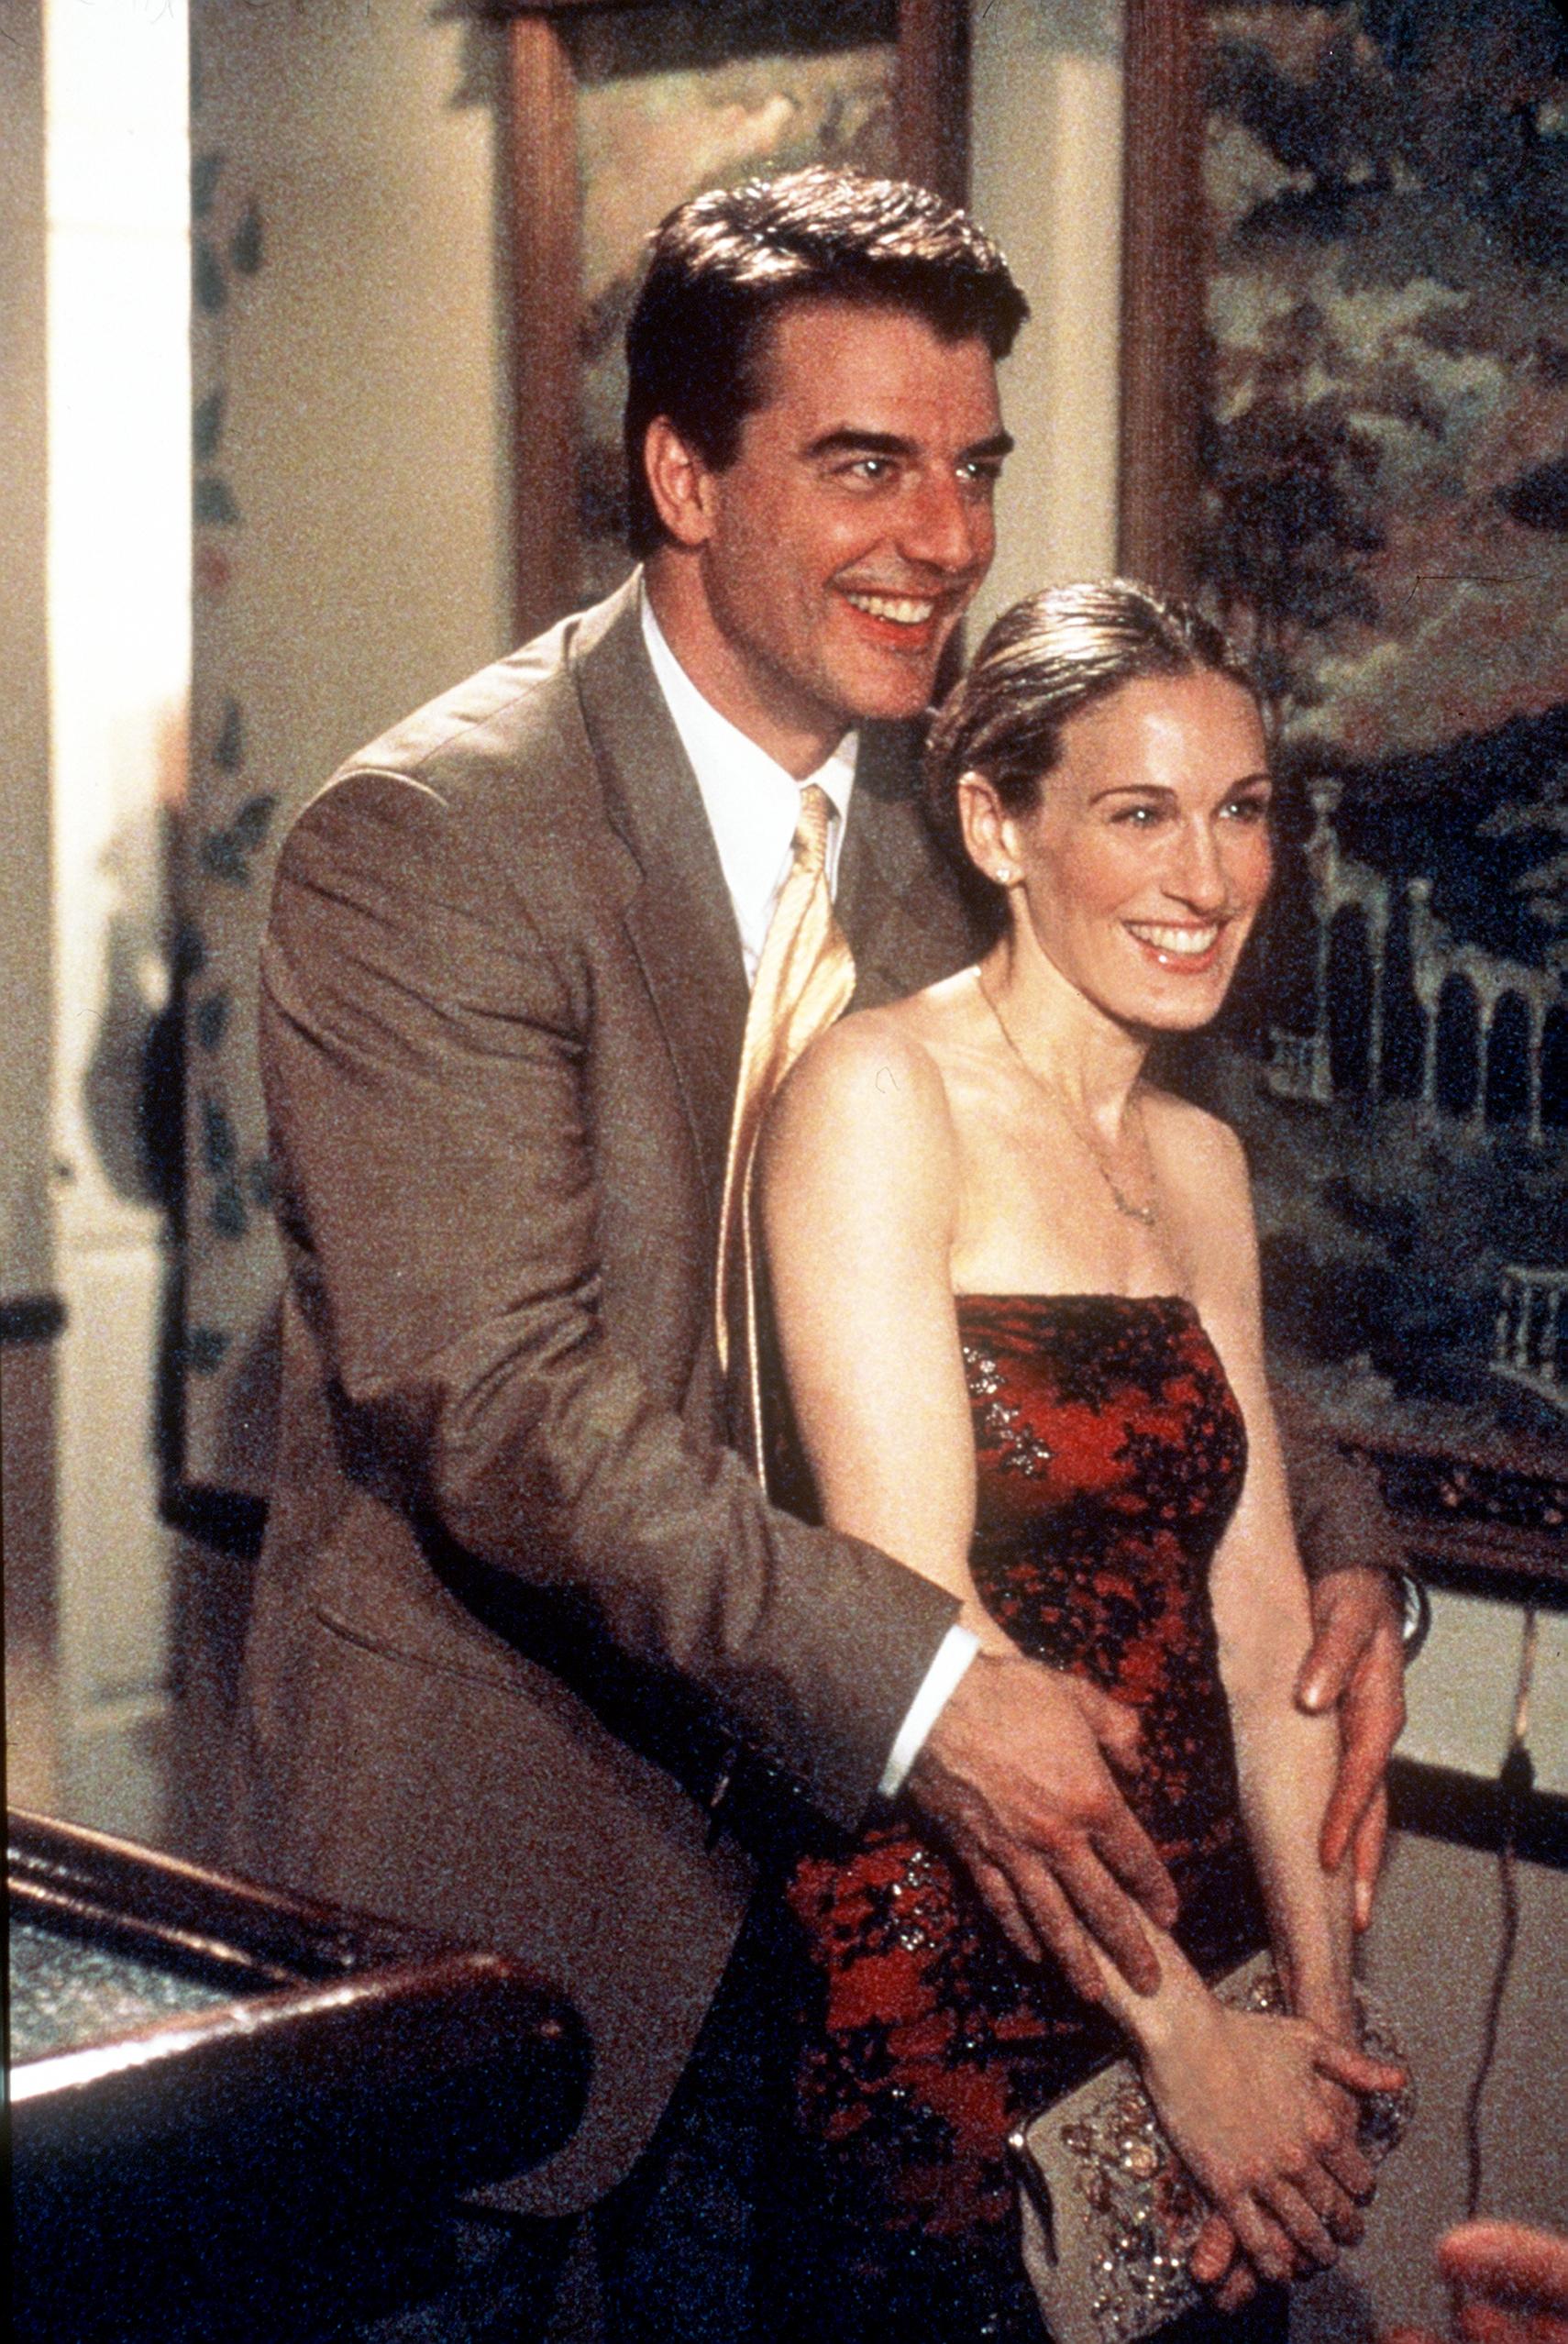 Mr. Big and Carrie Bradshaw in season 2 of 'Sex and the City'